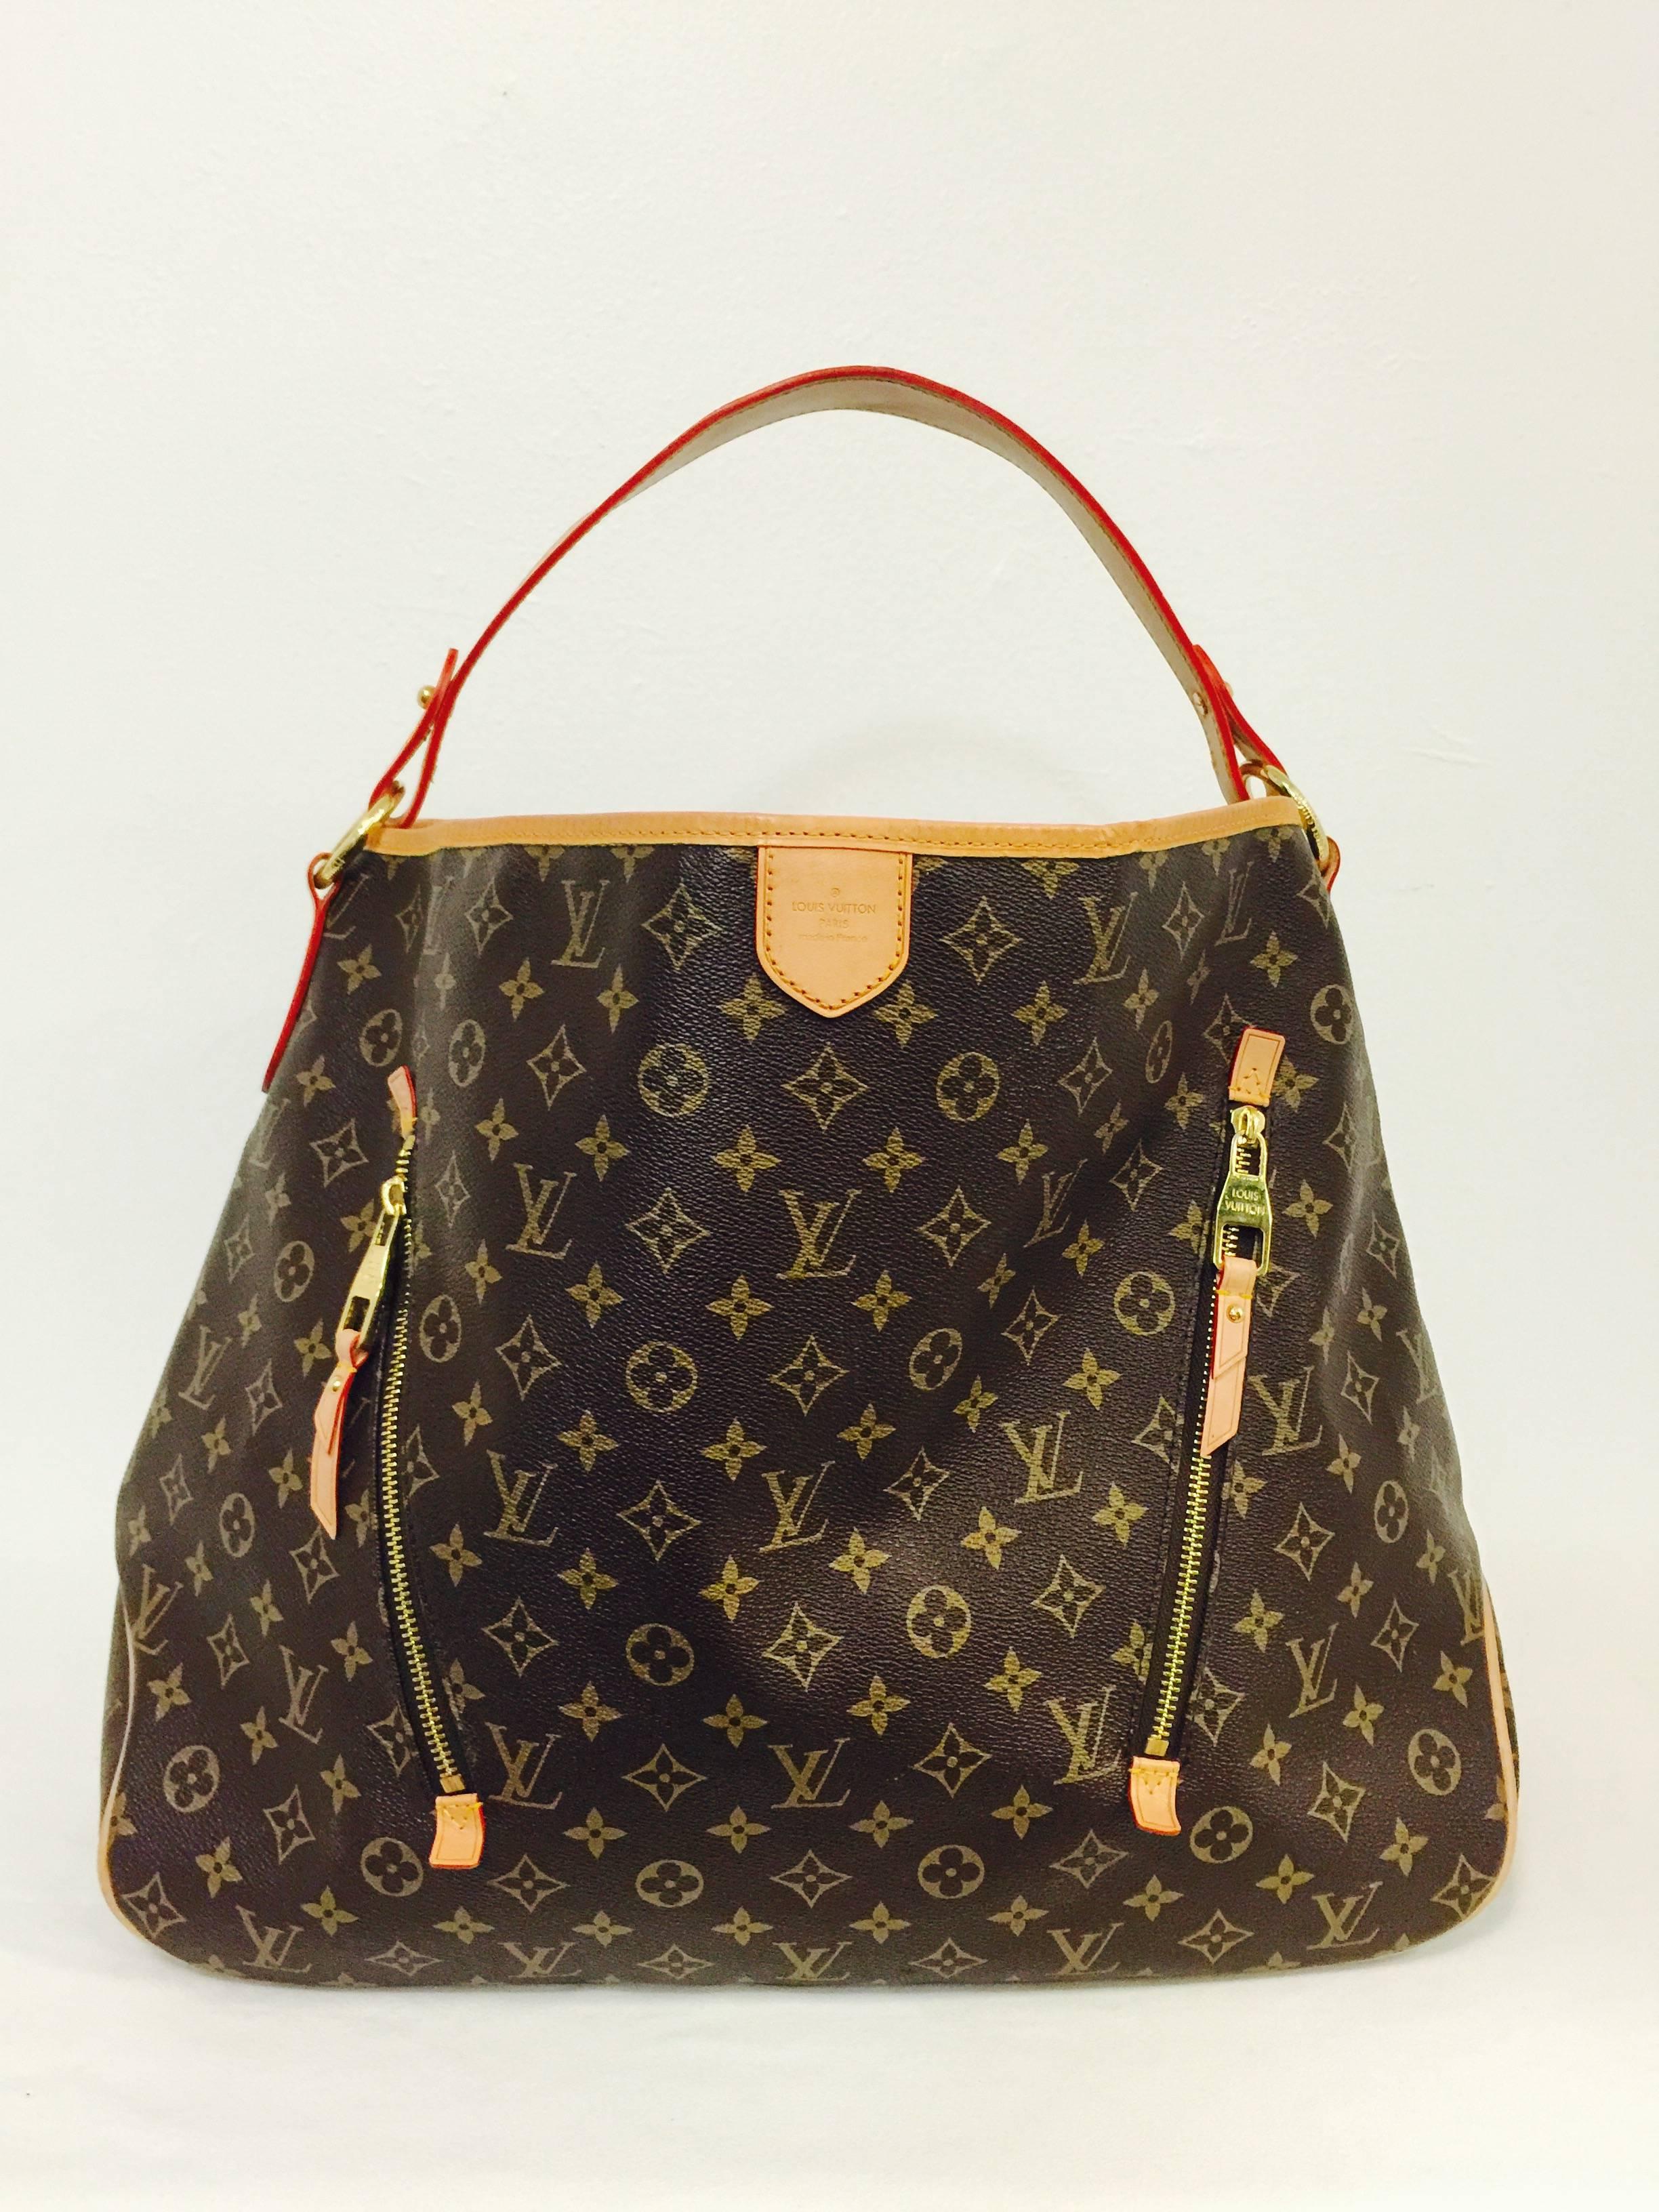 This spacious tote proves that Louis Vuitton is much more than the 